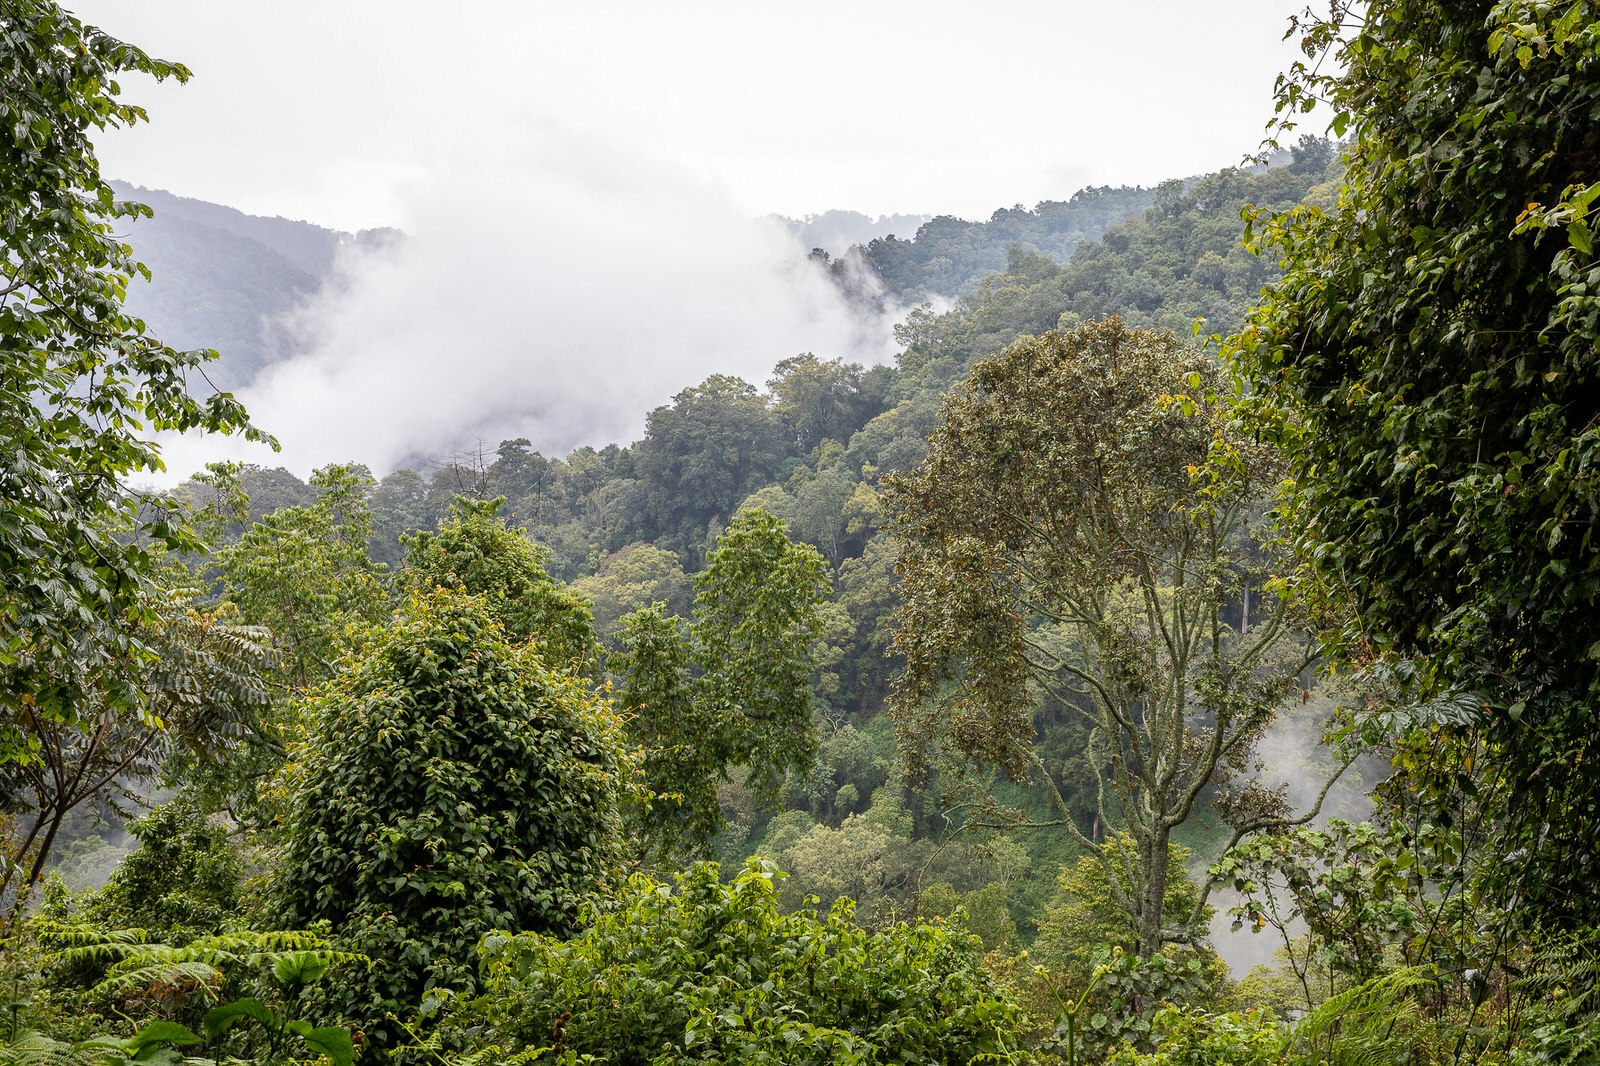 Low clouds hang above a hilly section of rainforest.